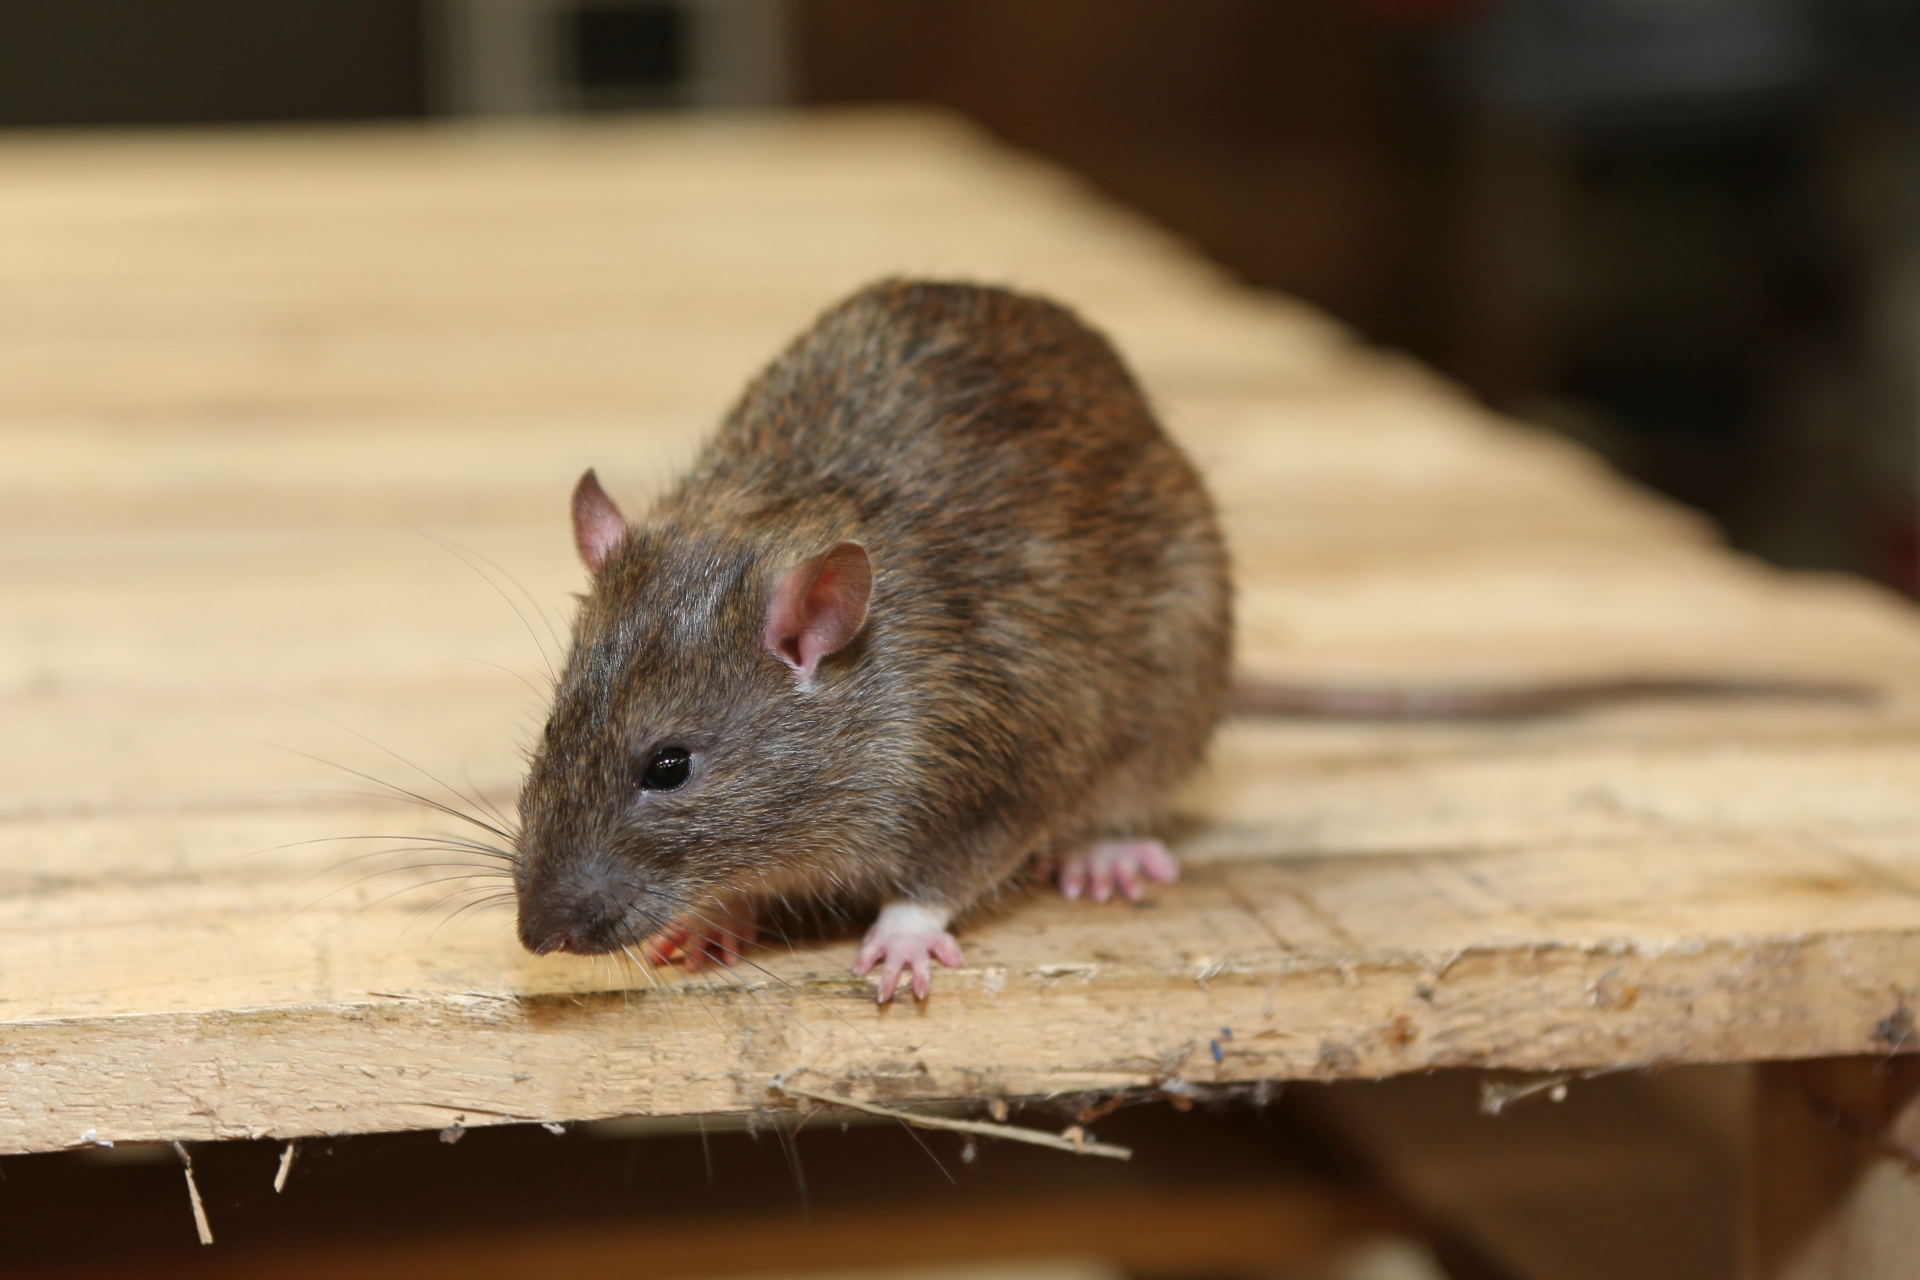 Rat Control, Pest Control in Staines-upon-Thames, Egham Hythe, TW18. Call Now 020 8166 9746